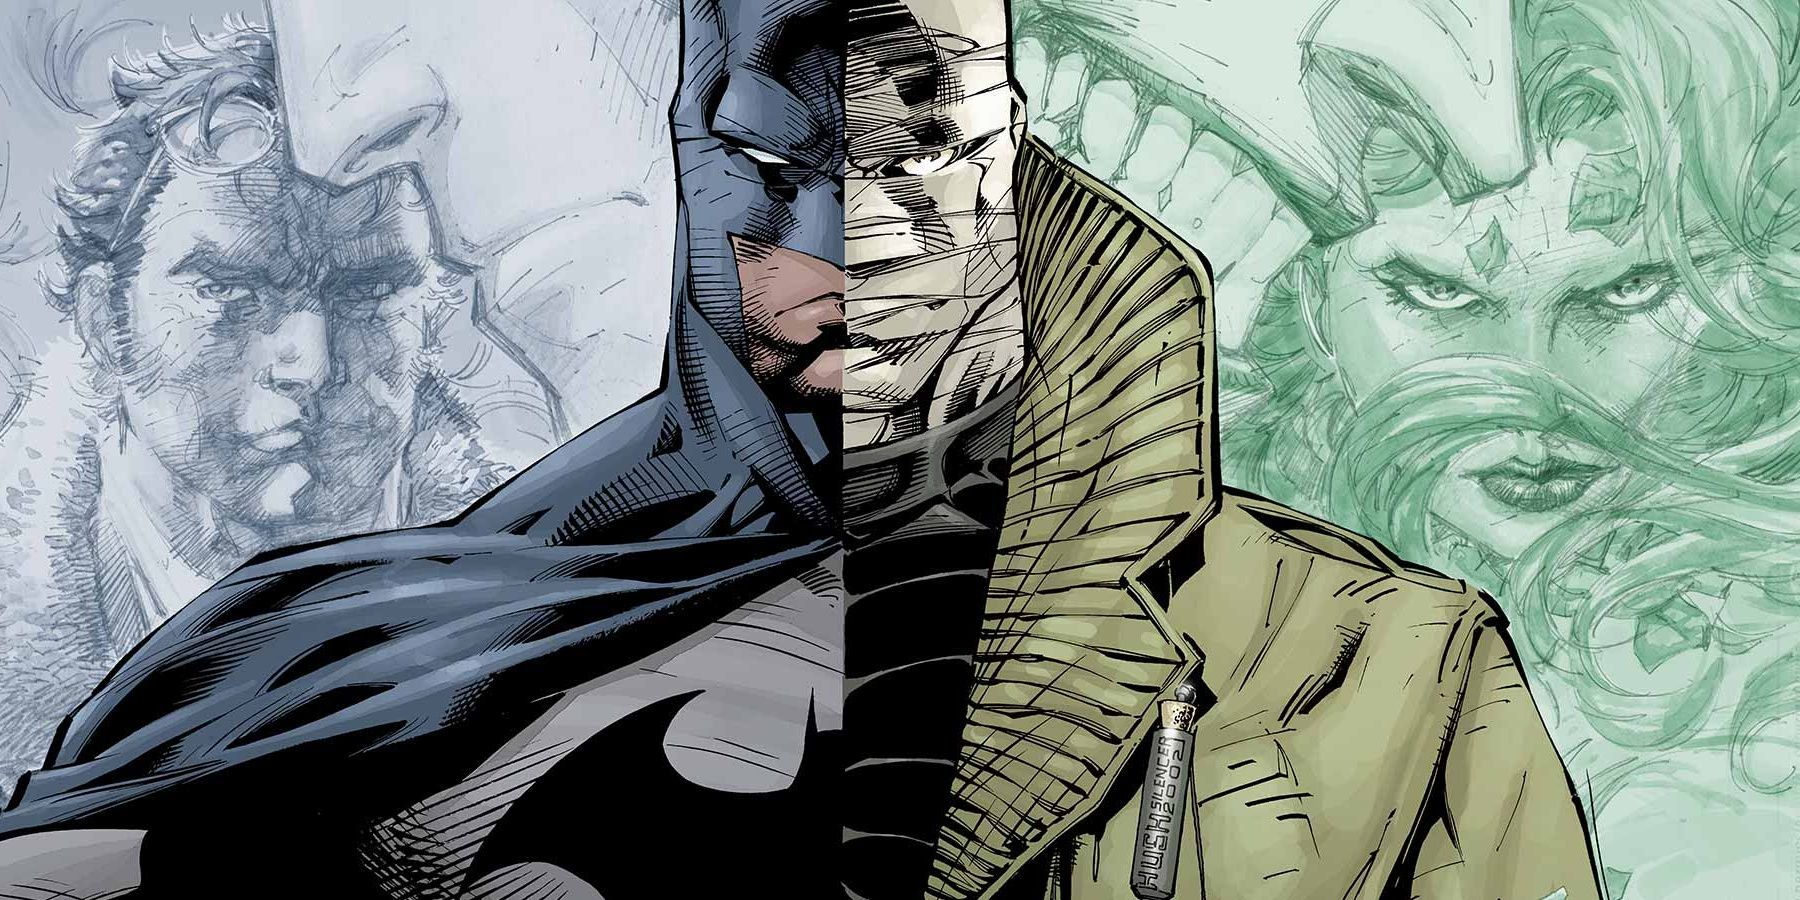 DC Didn't Want Loeb & Lee's Hush to Be Part of the Main Batman Series